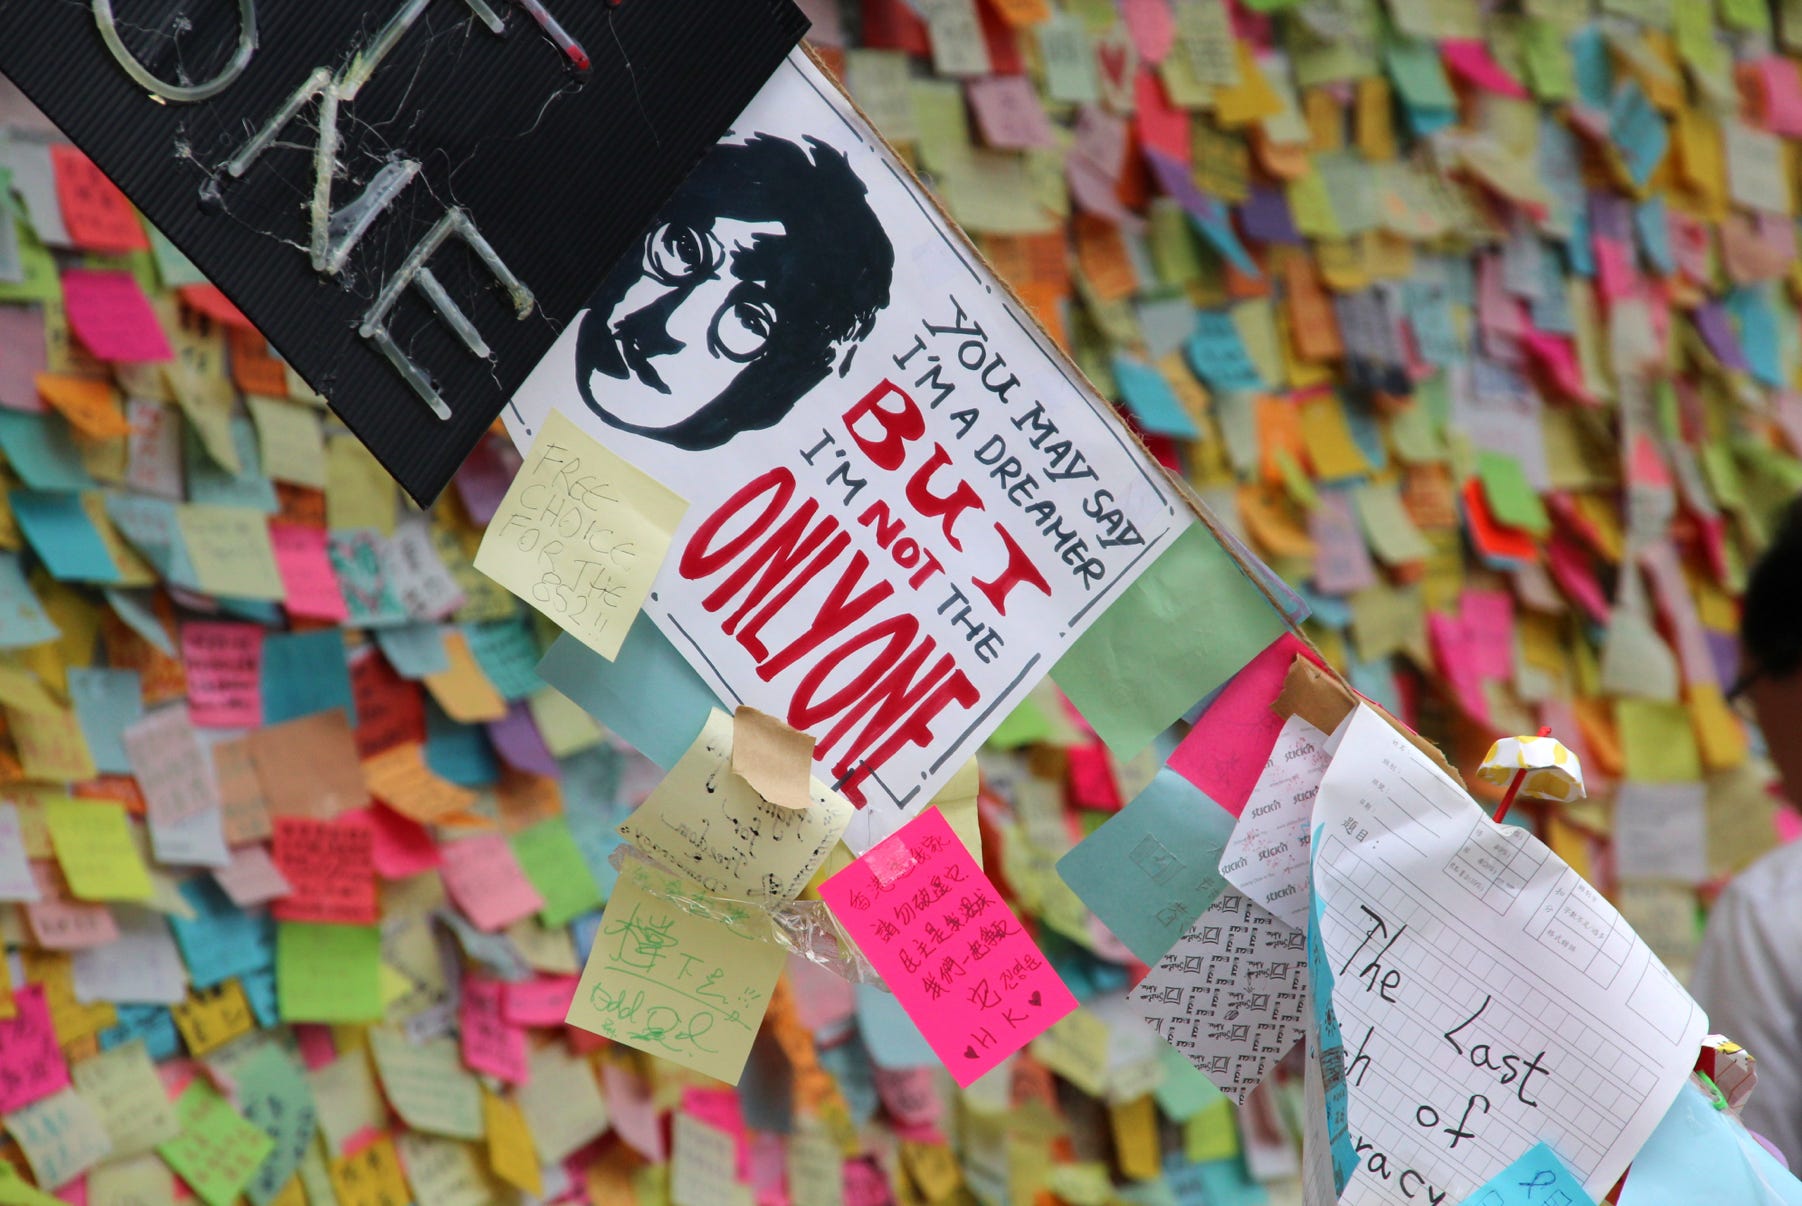 John Lennon quote used during protests in Hong Kong in October 2014